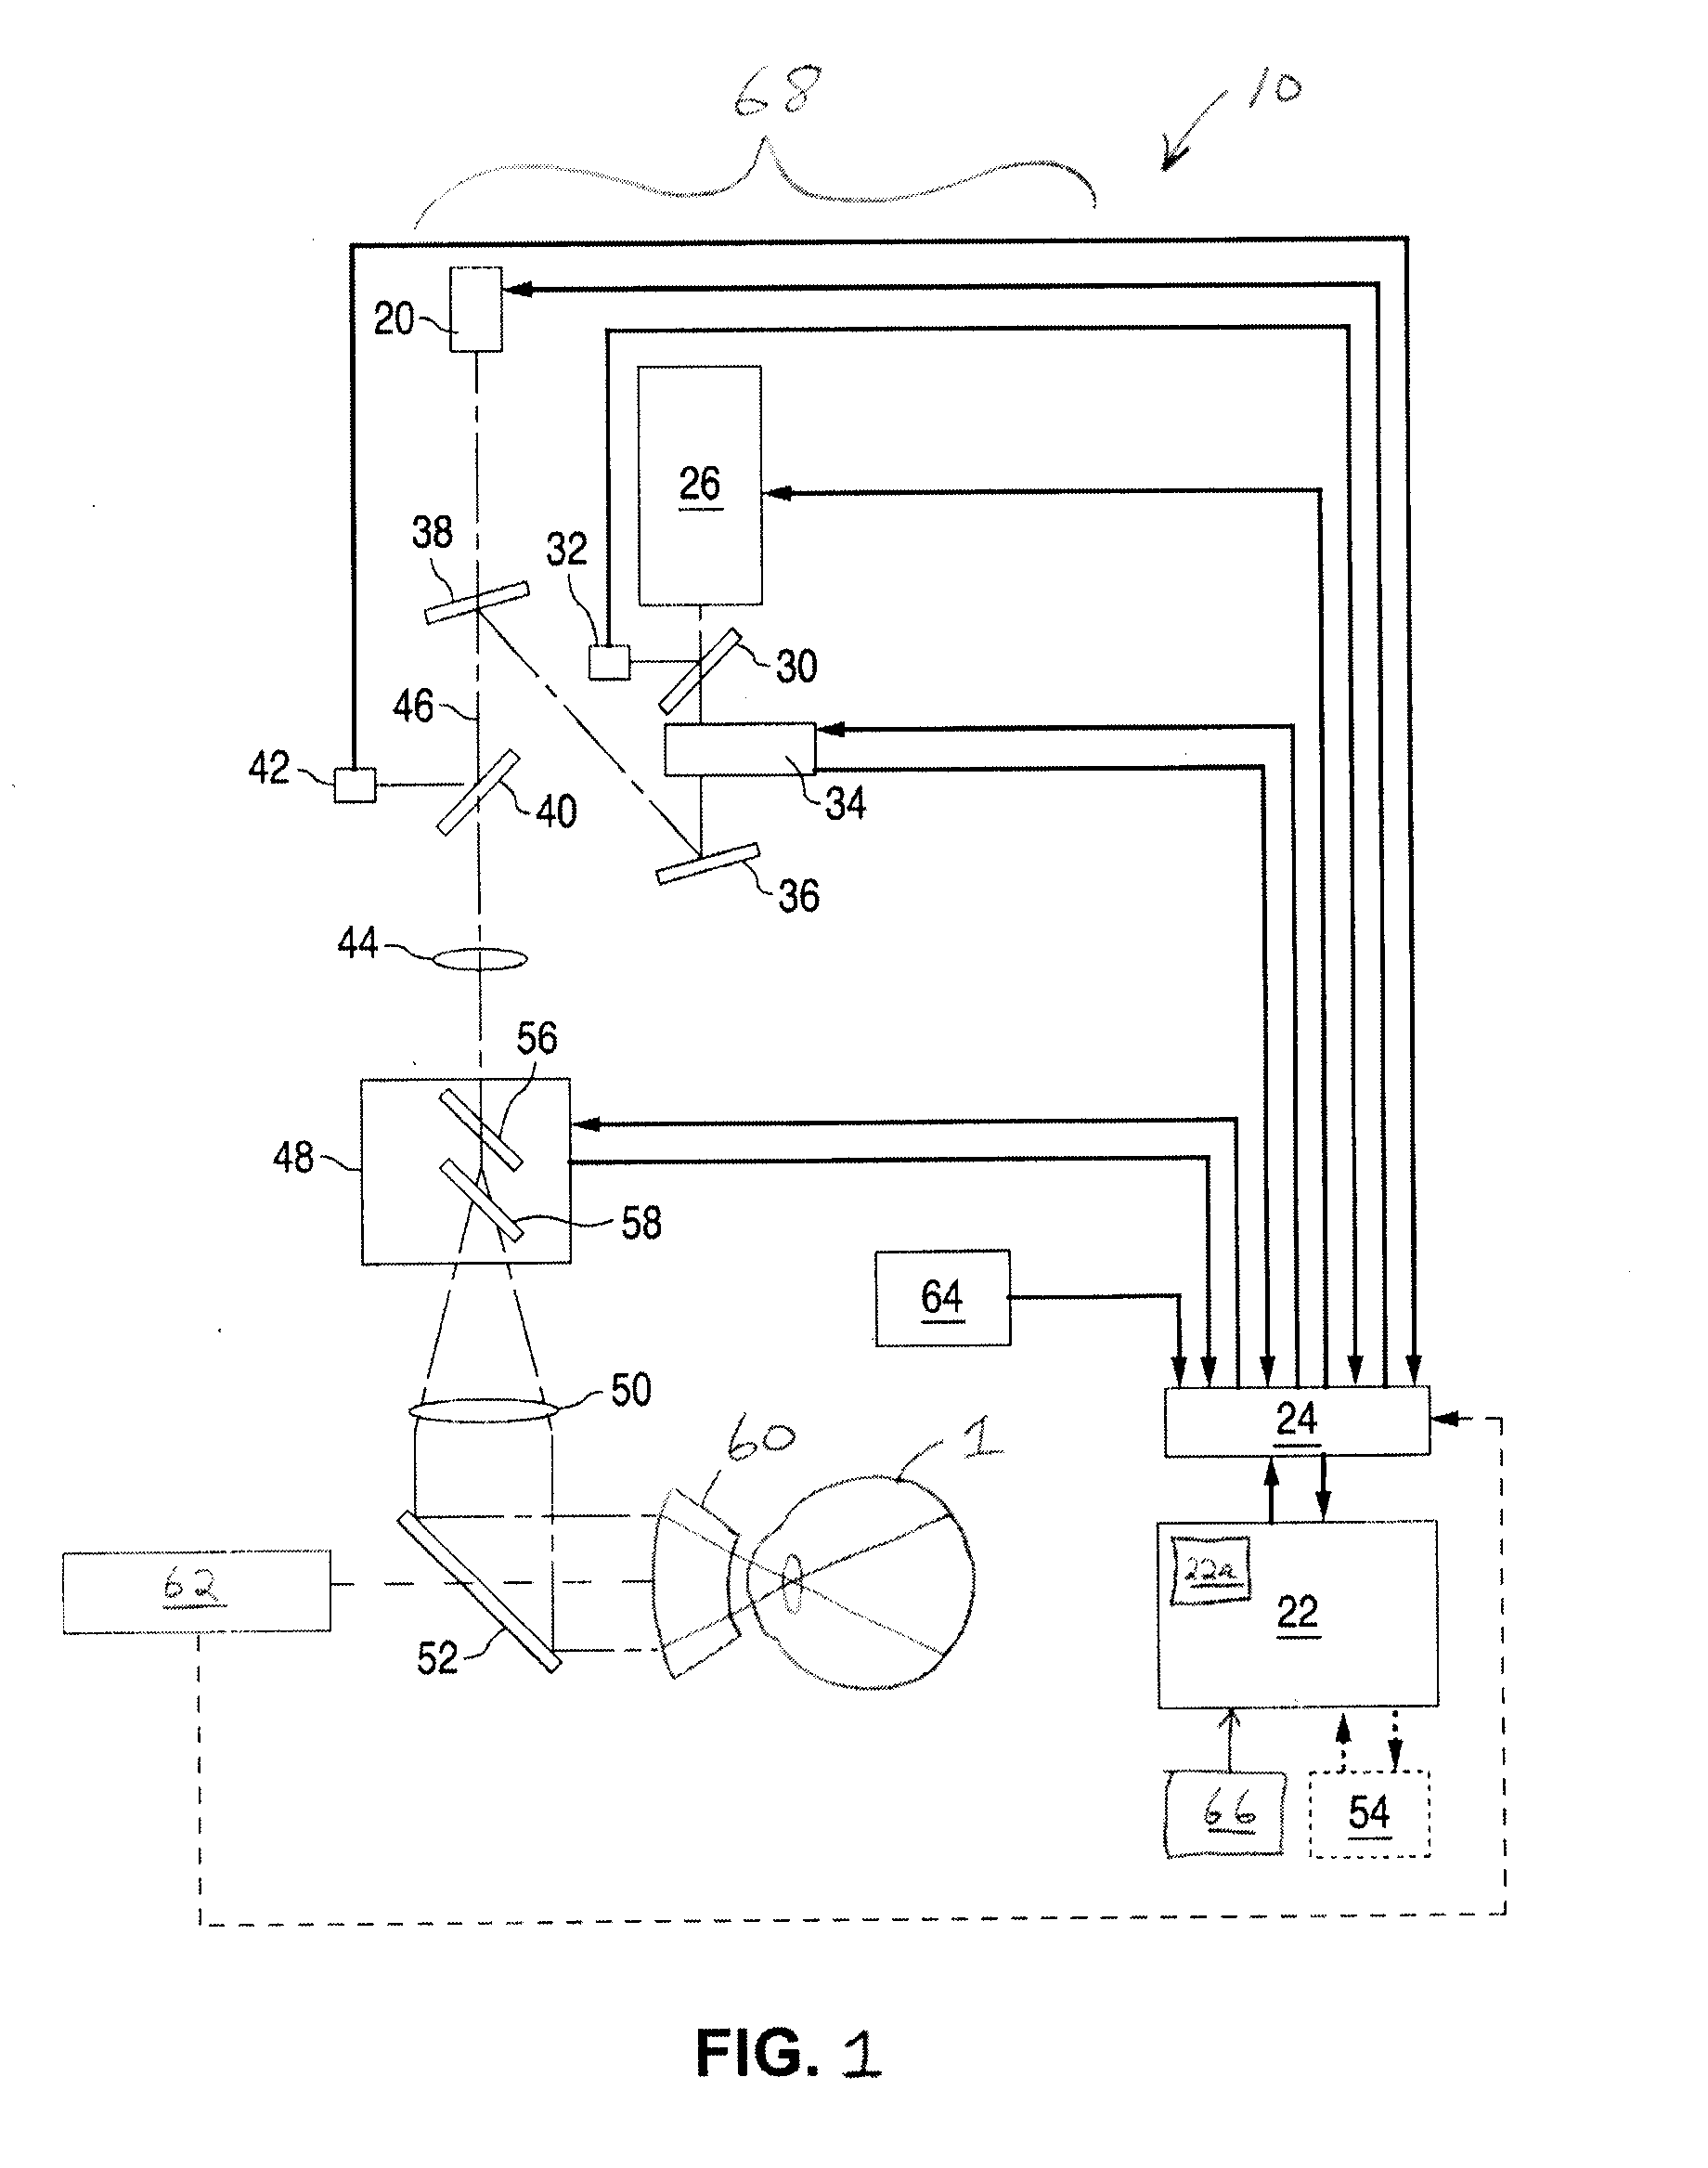 Semi-automated ophthalmic photocoagulation method and apparatus